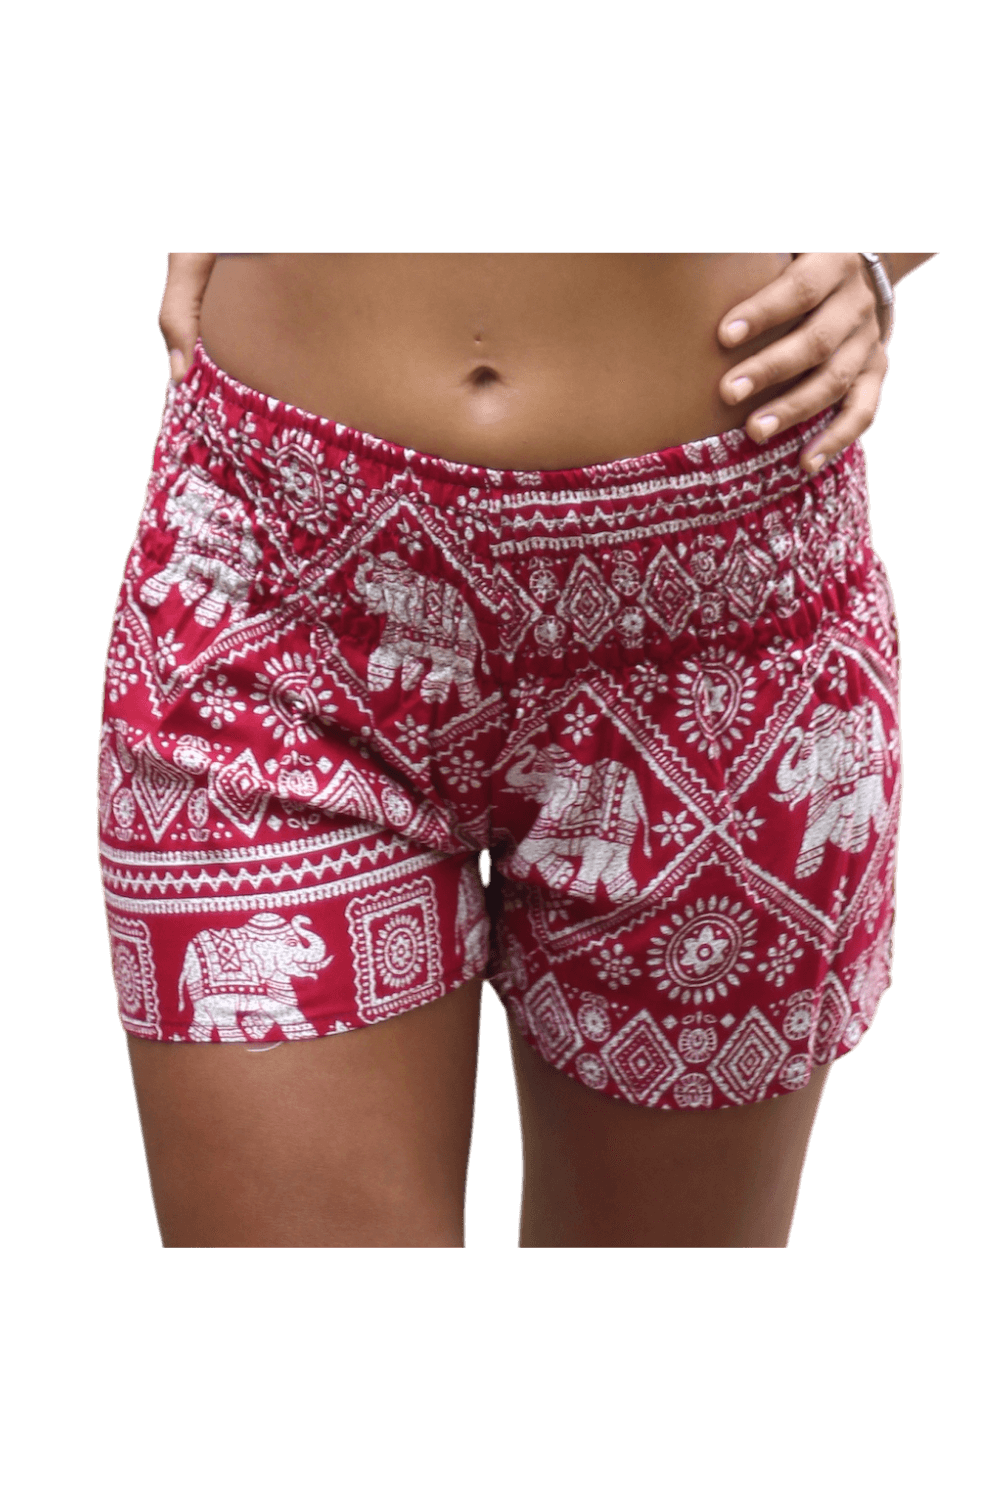 Women's Colorful Print Cotton Shorts Hot Pants Lounge Wear Cotton Shorts  for Summer for Women, Young Ladies and Girls